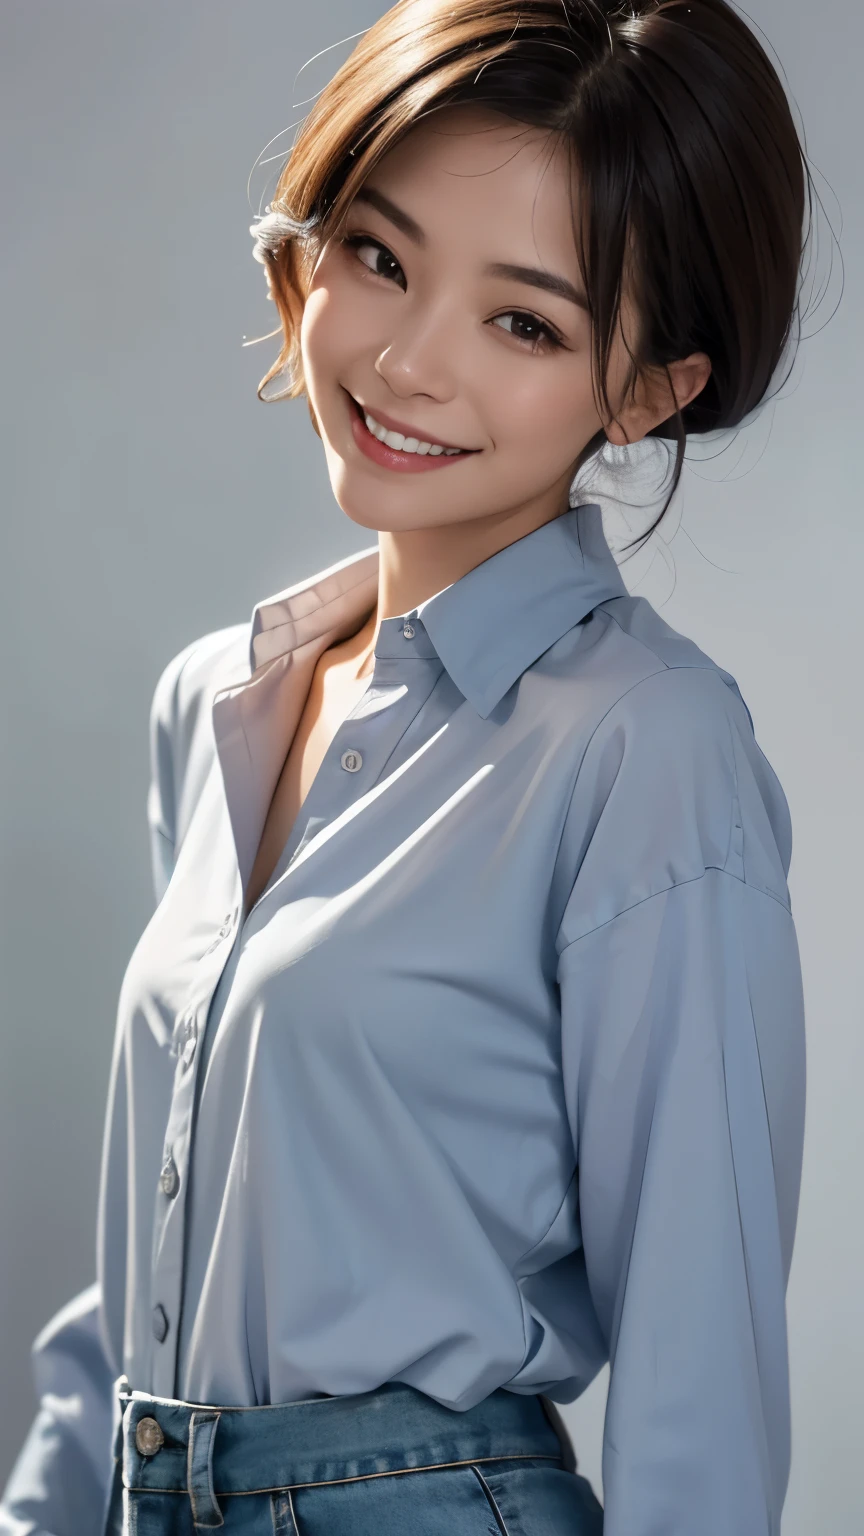 A woman wearing a loose, neat shirt is looking straight into the camera, Small breasts, The shirt is buttoned up to the top, Looking at the one you love and smiling, The background is a plain gray gradient, Close-up